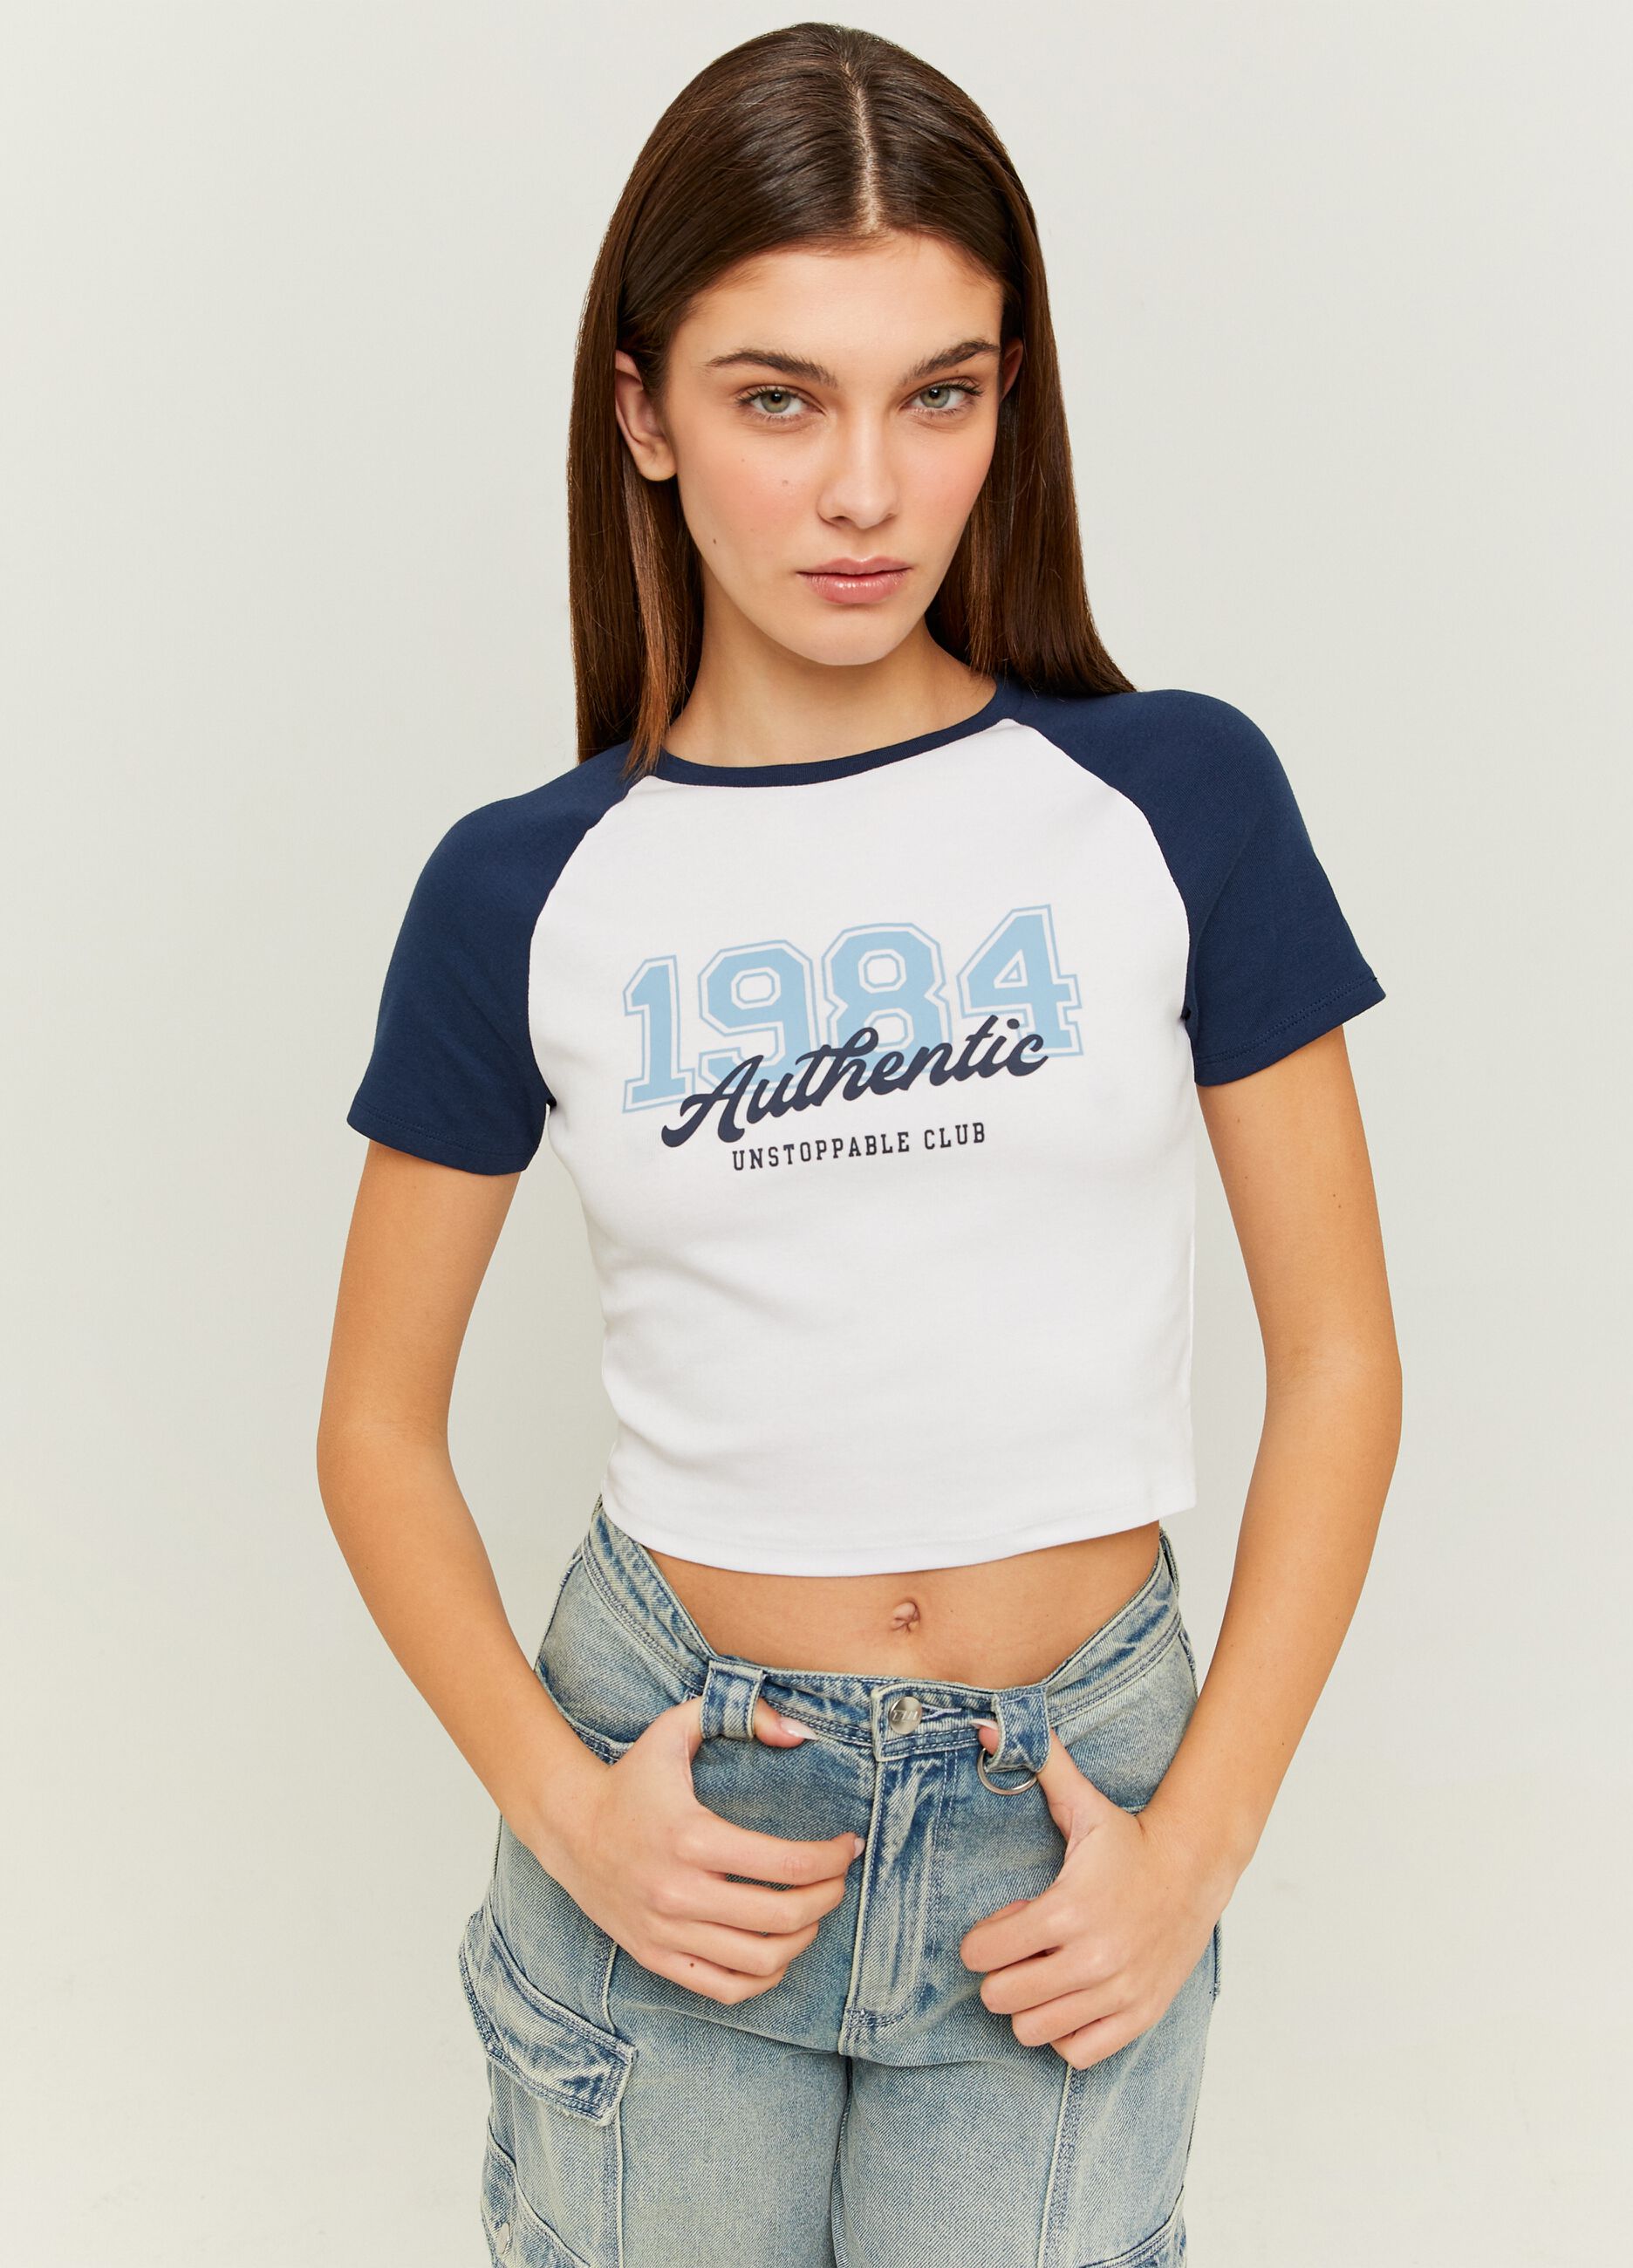 Crop T-shirt with raglan sleeves and college print